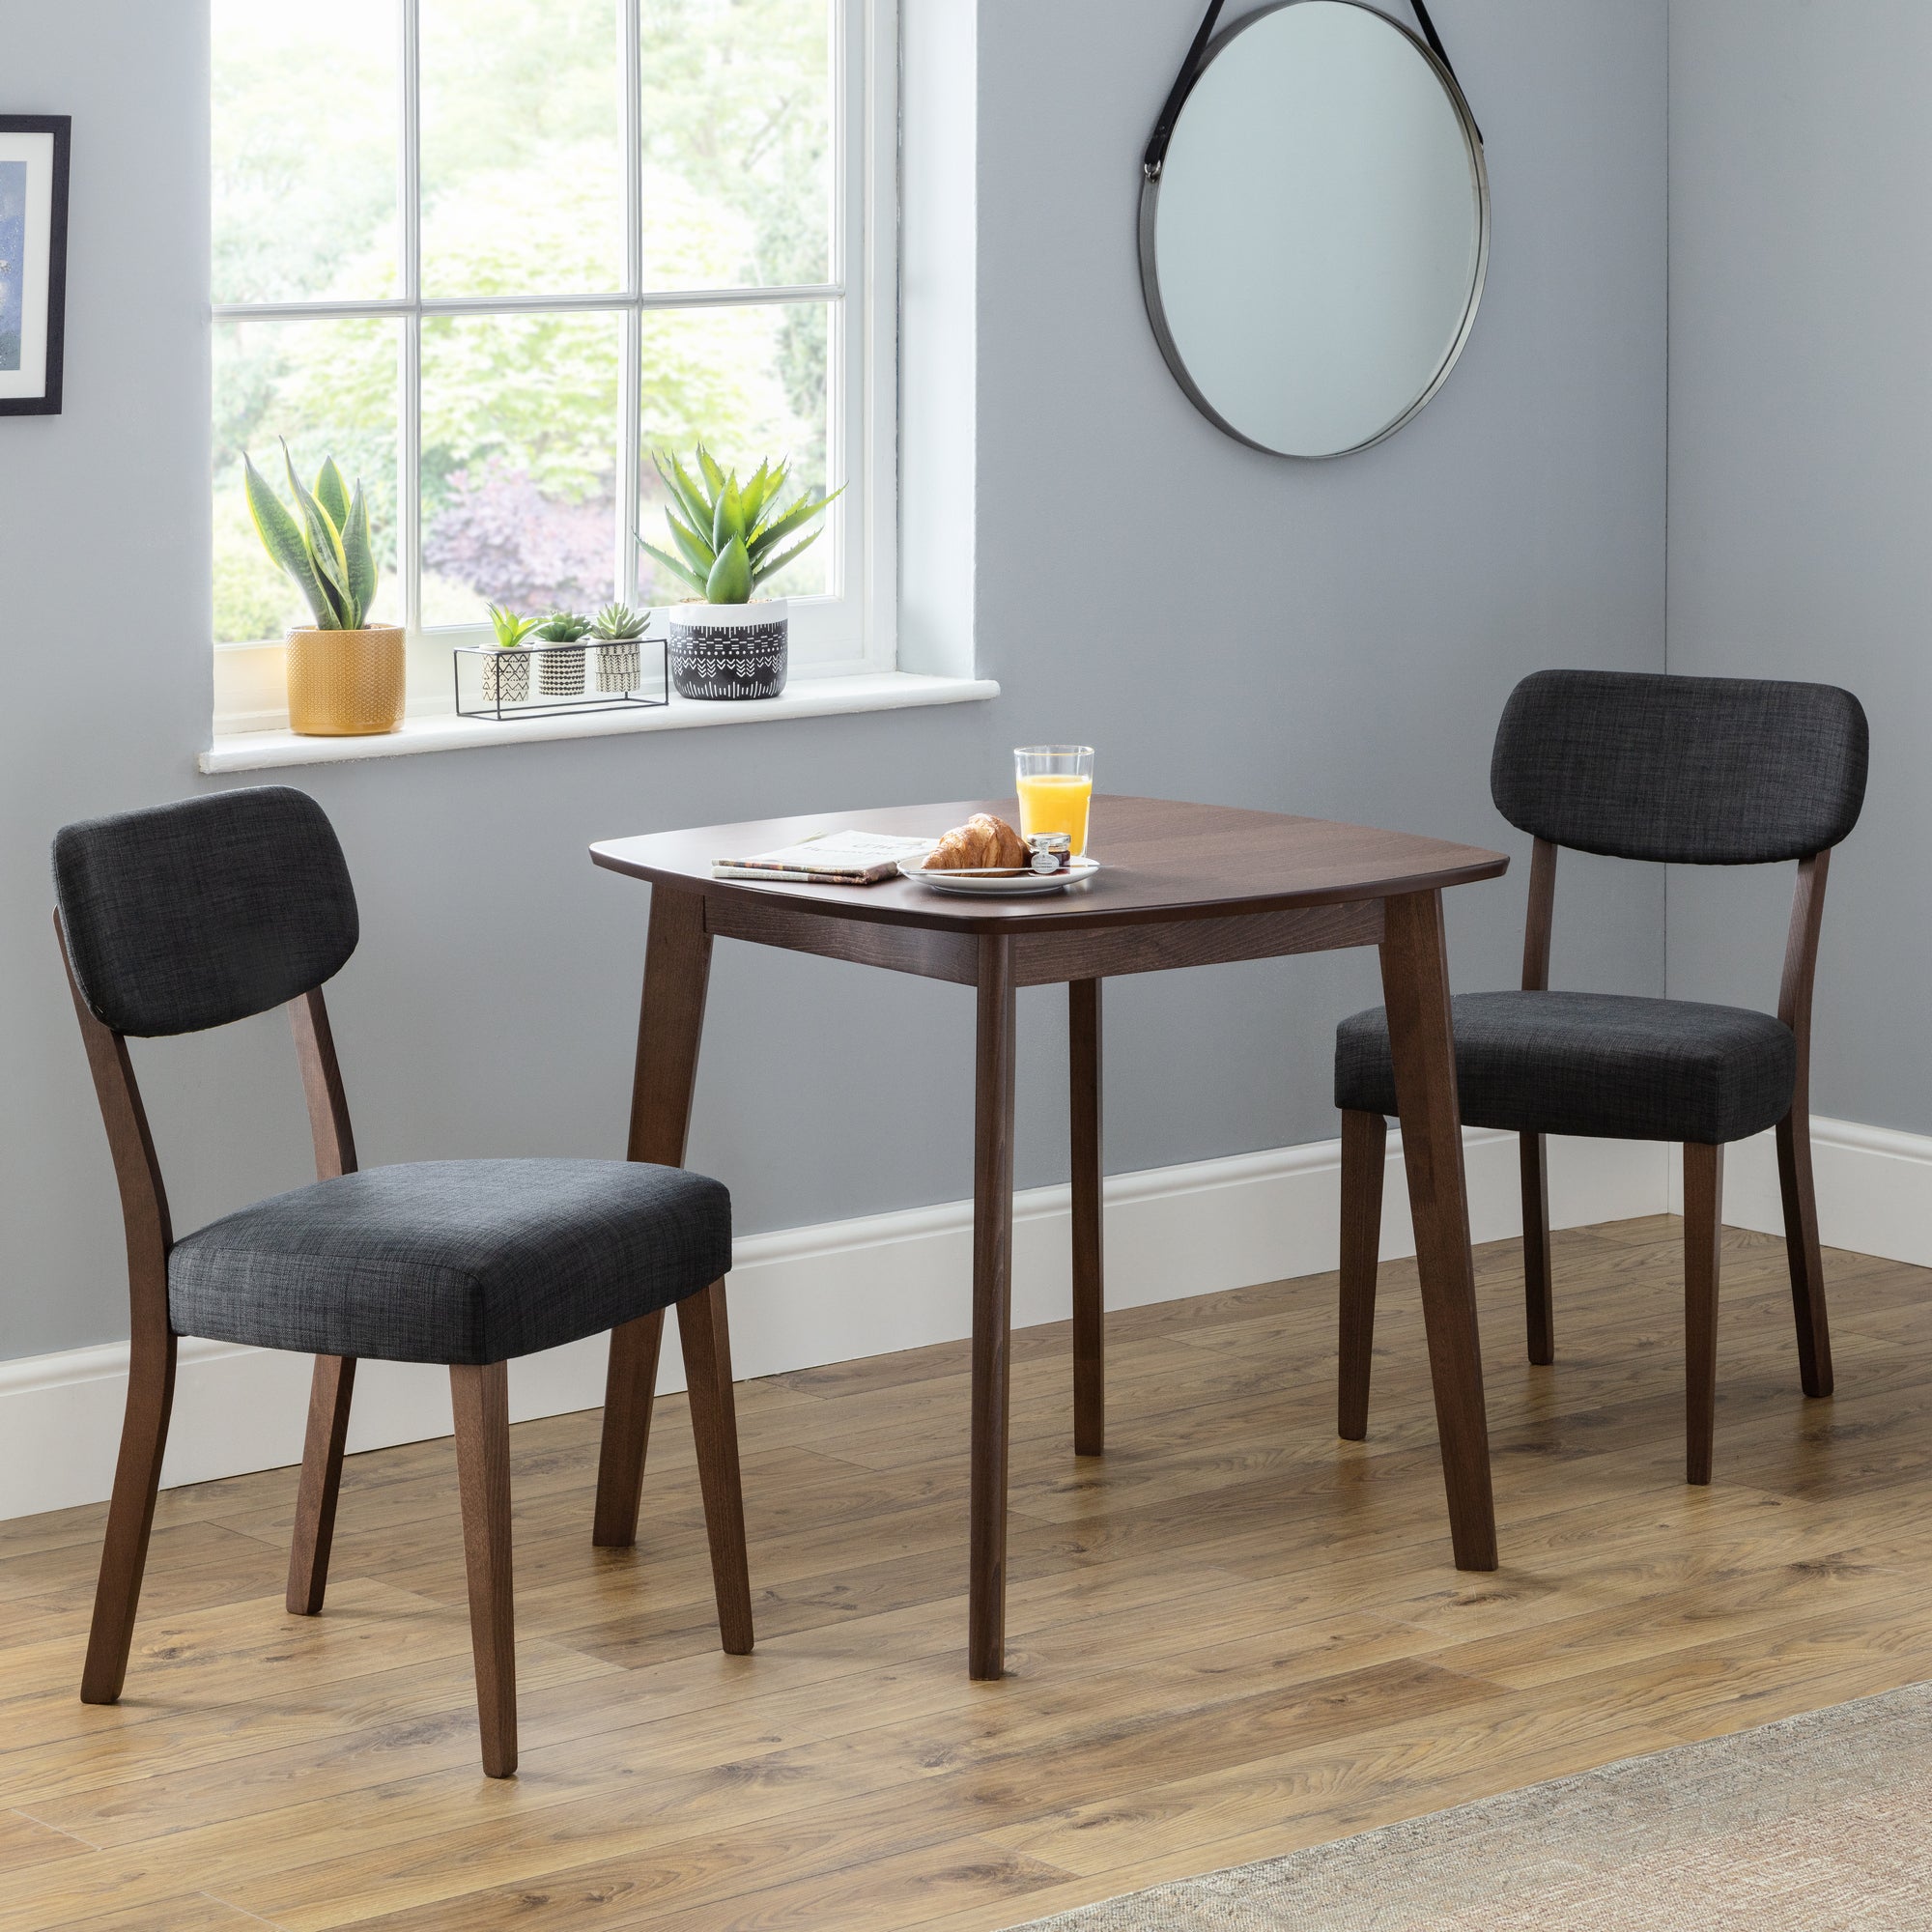 Lennox Square Dining Table With 2 Farringdon Chairs Beech Wood Brown